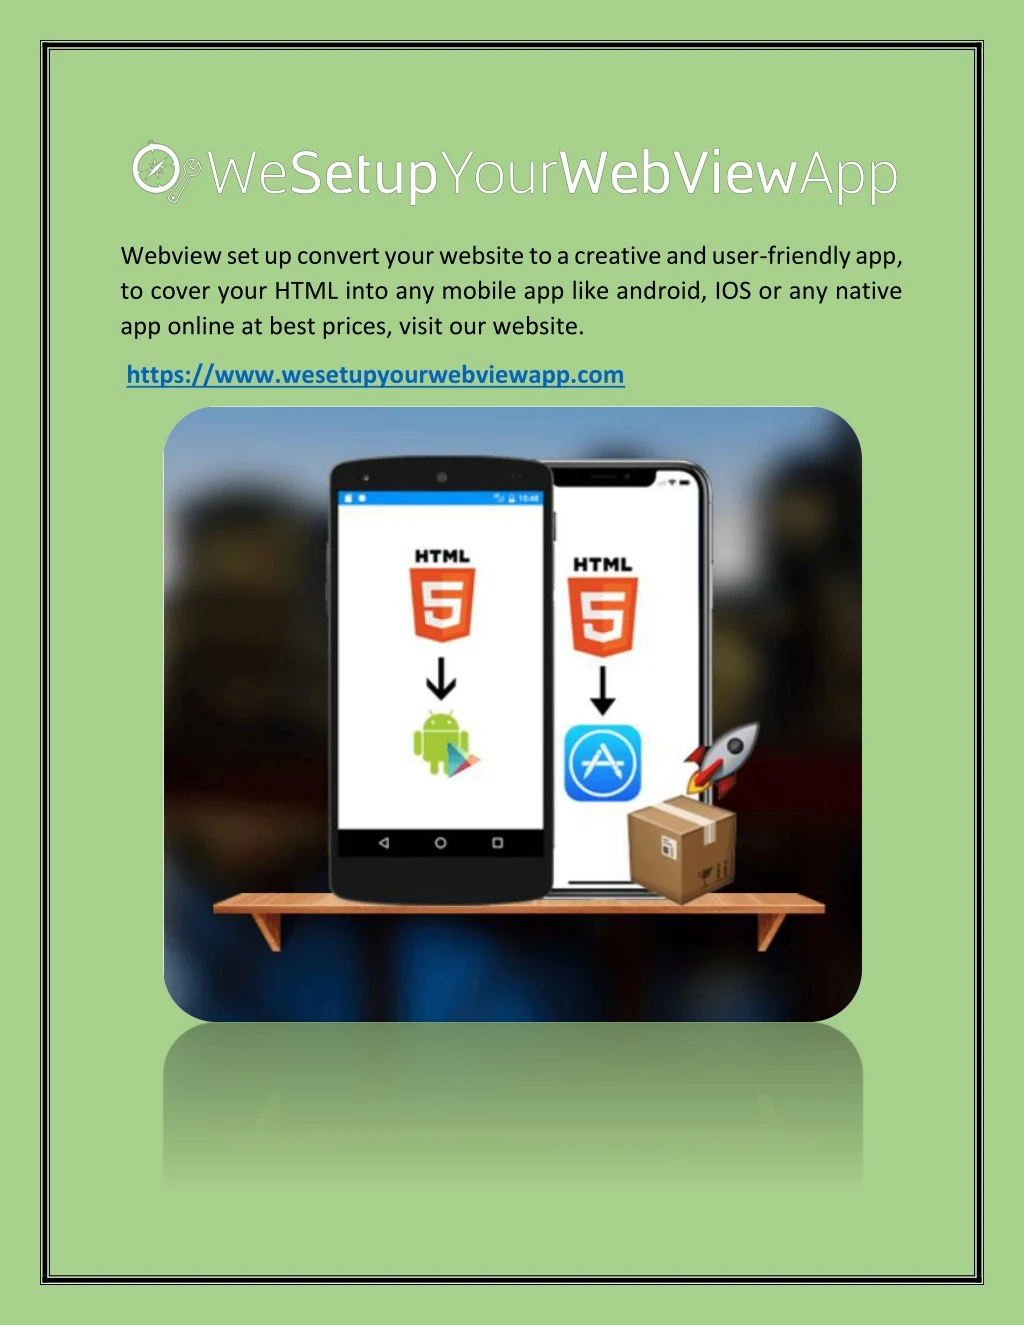 webview set up convert your website to a creative